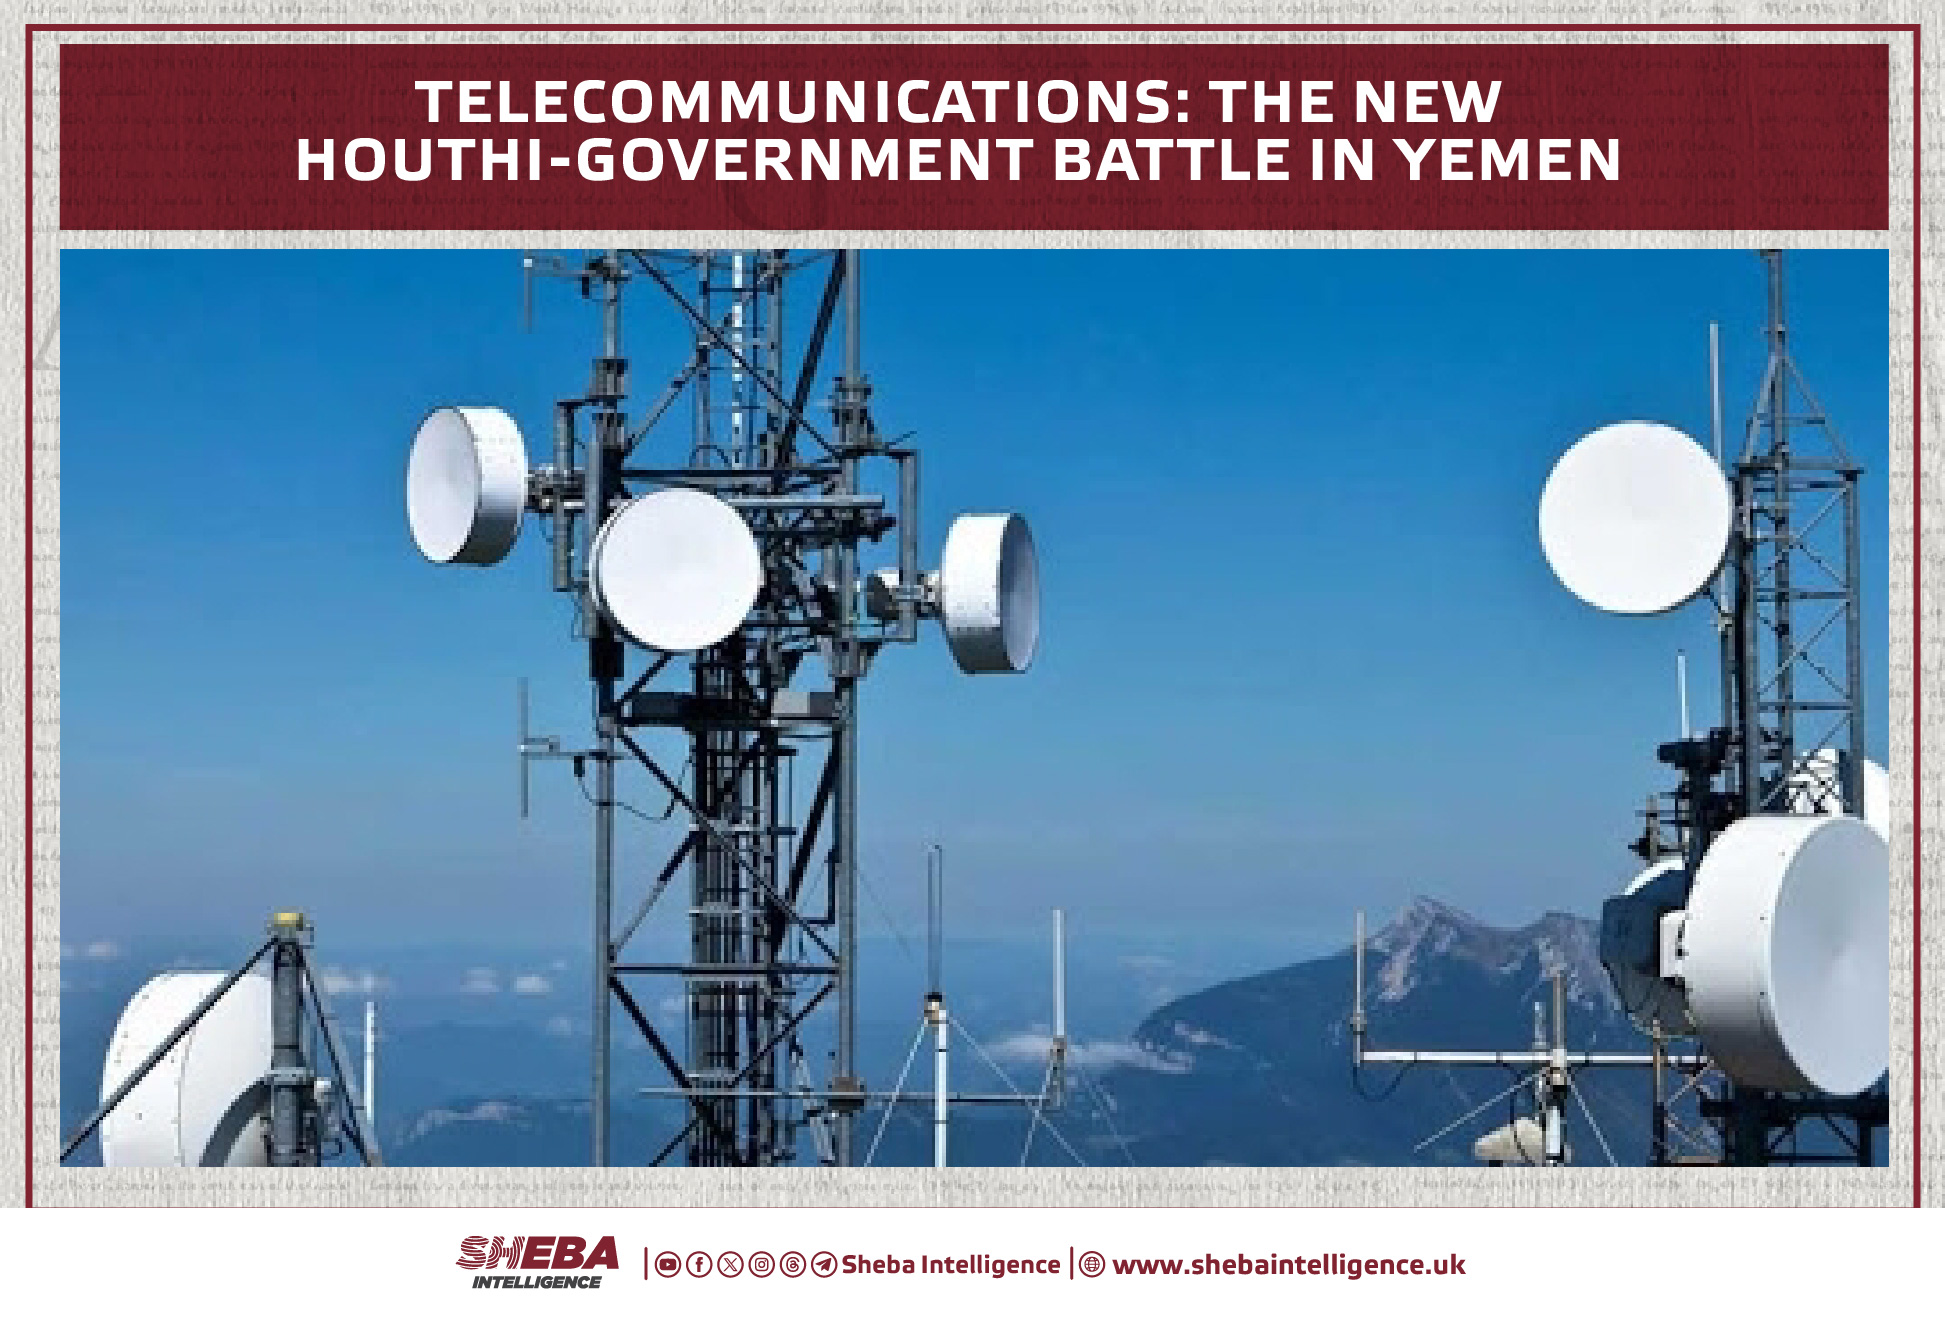 Telecommunications: The New Houthi-Government Battle in Yemen